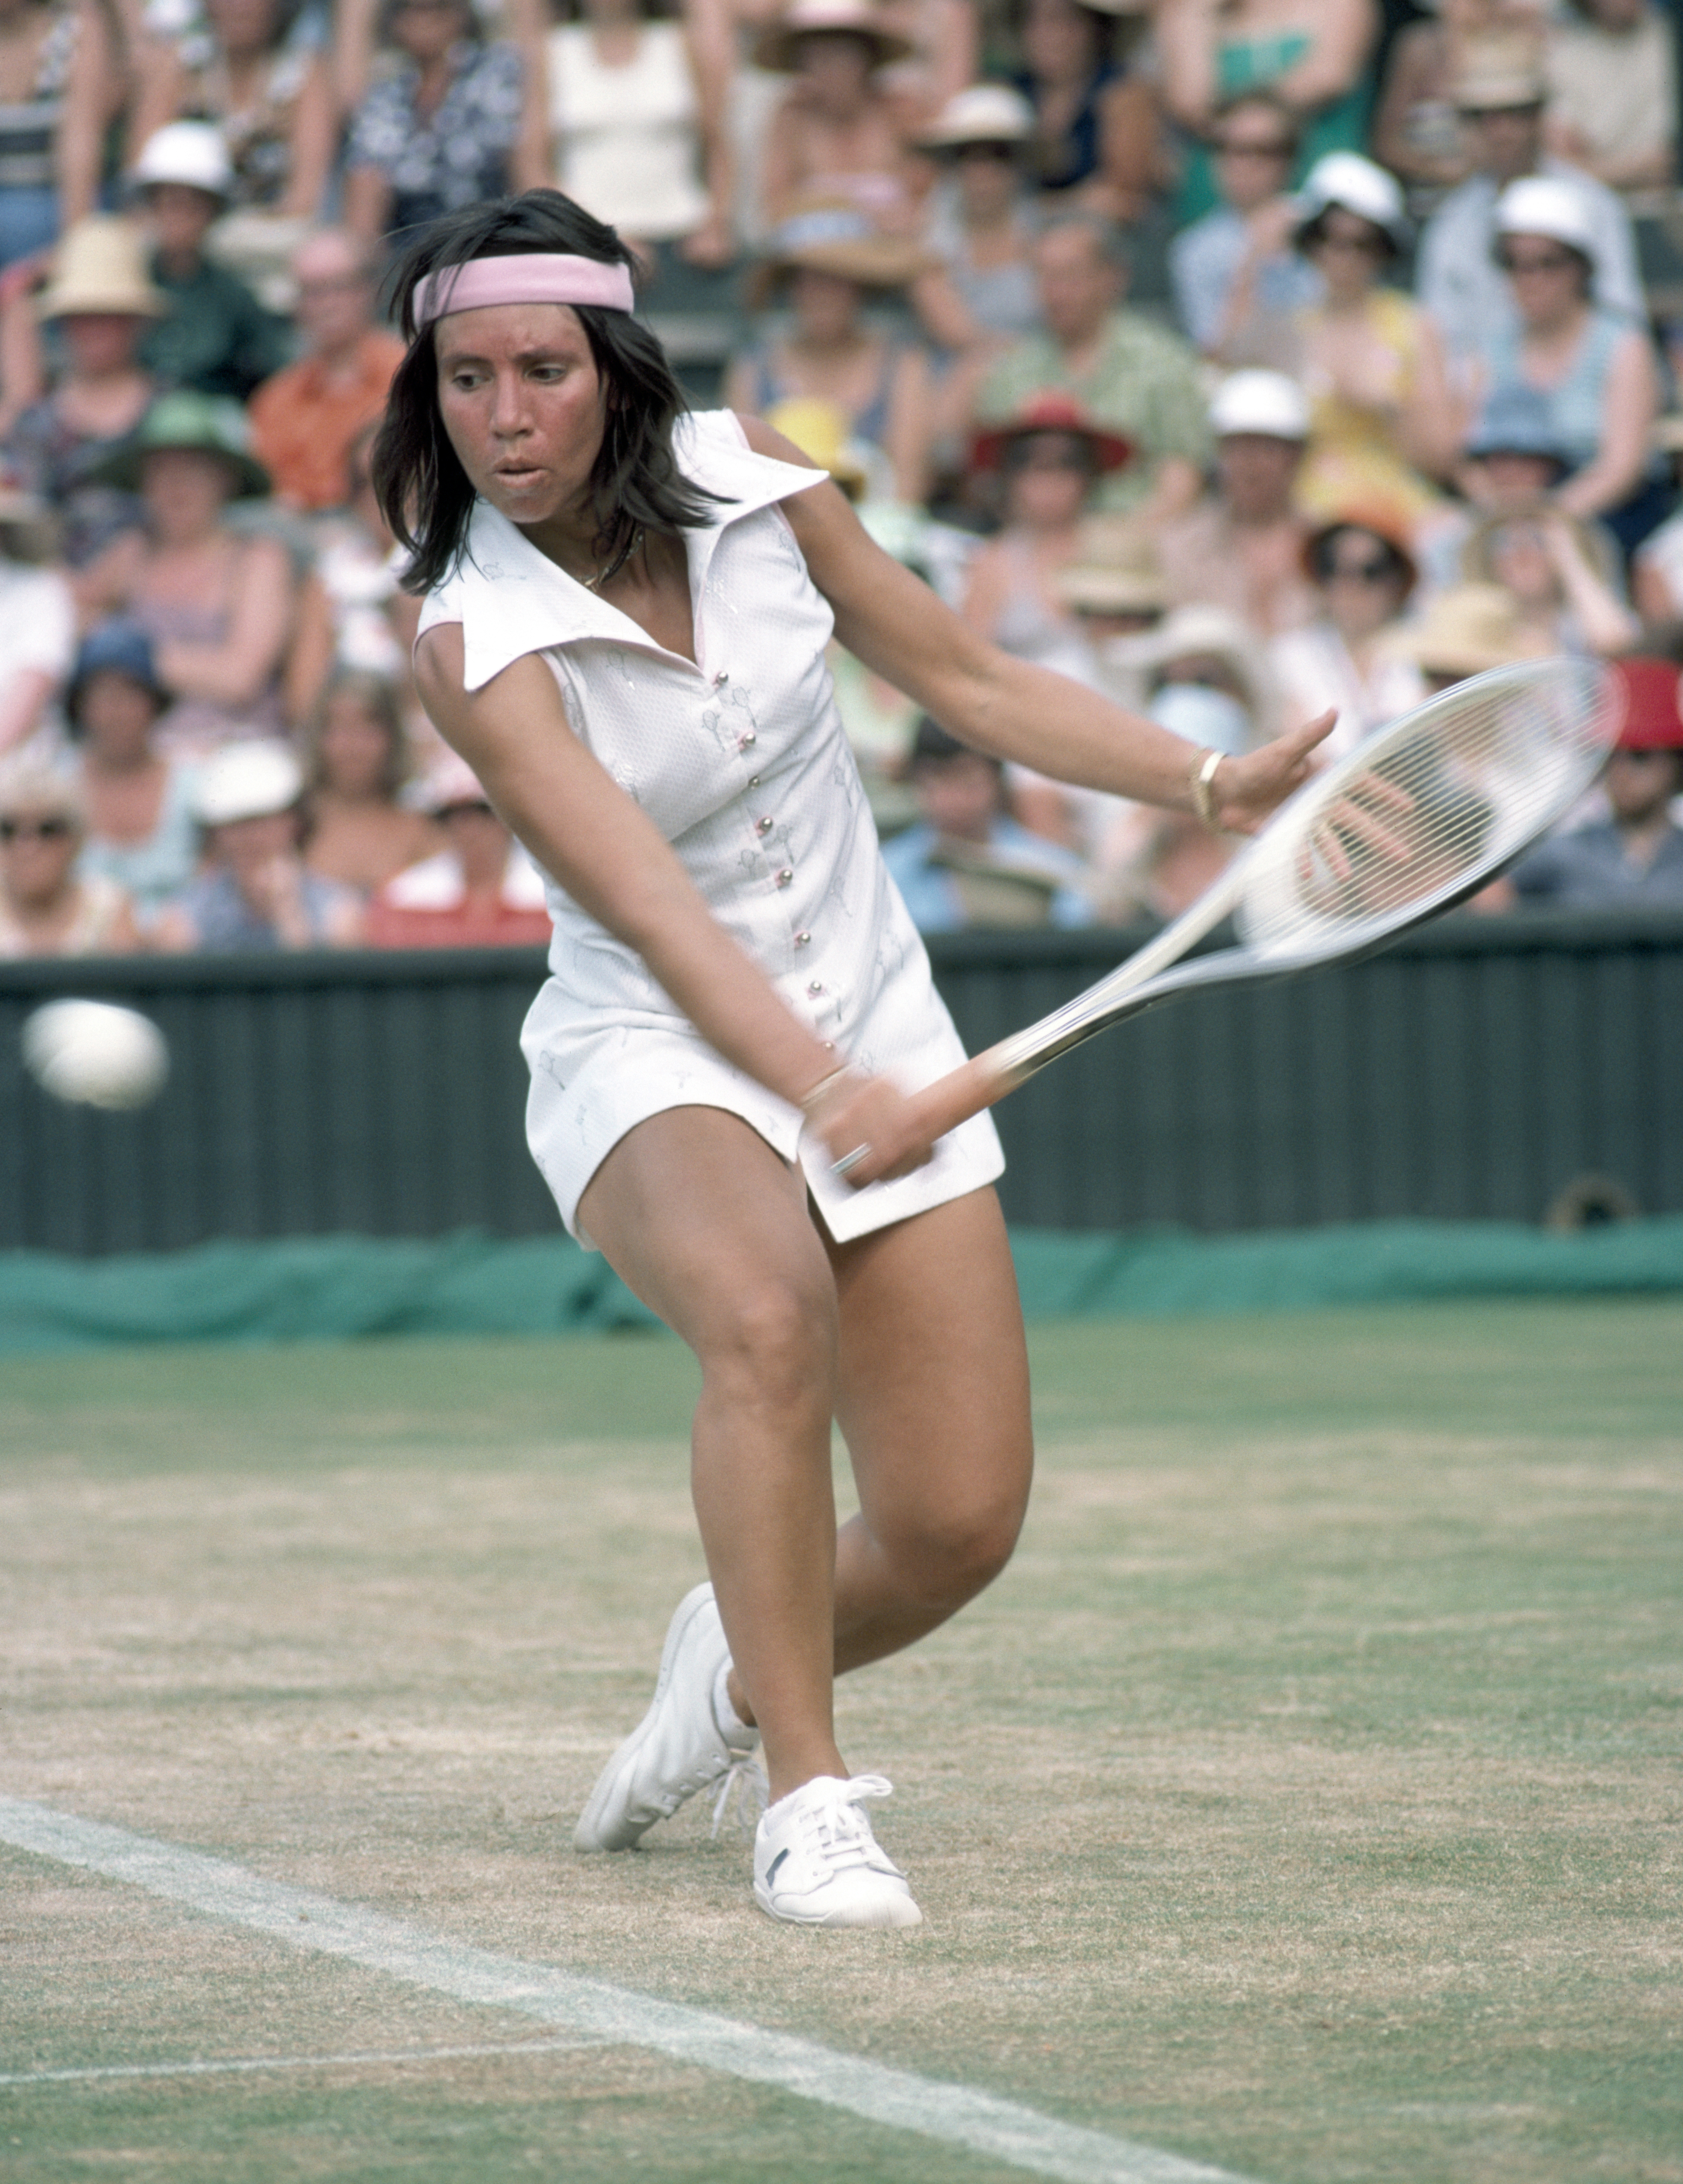 Rosie Casals now 65, entered tennis as an outsider and a long shot: she was the 5-ft.-2 daughter of immigrants to the U.S. from El Salvador. “The other kids had nice tennis clothes, nice rackets, nice white shoes, and came in Cadillacs,” Casals once told People. “I felt stigmatized because we were poor.” She got over it — and she forced the rest of the tennis world to as well.